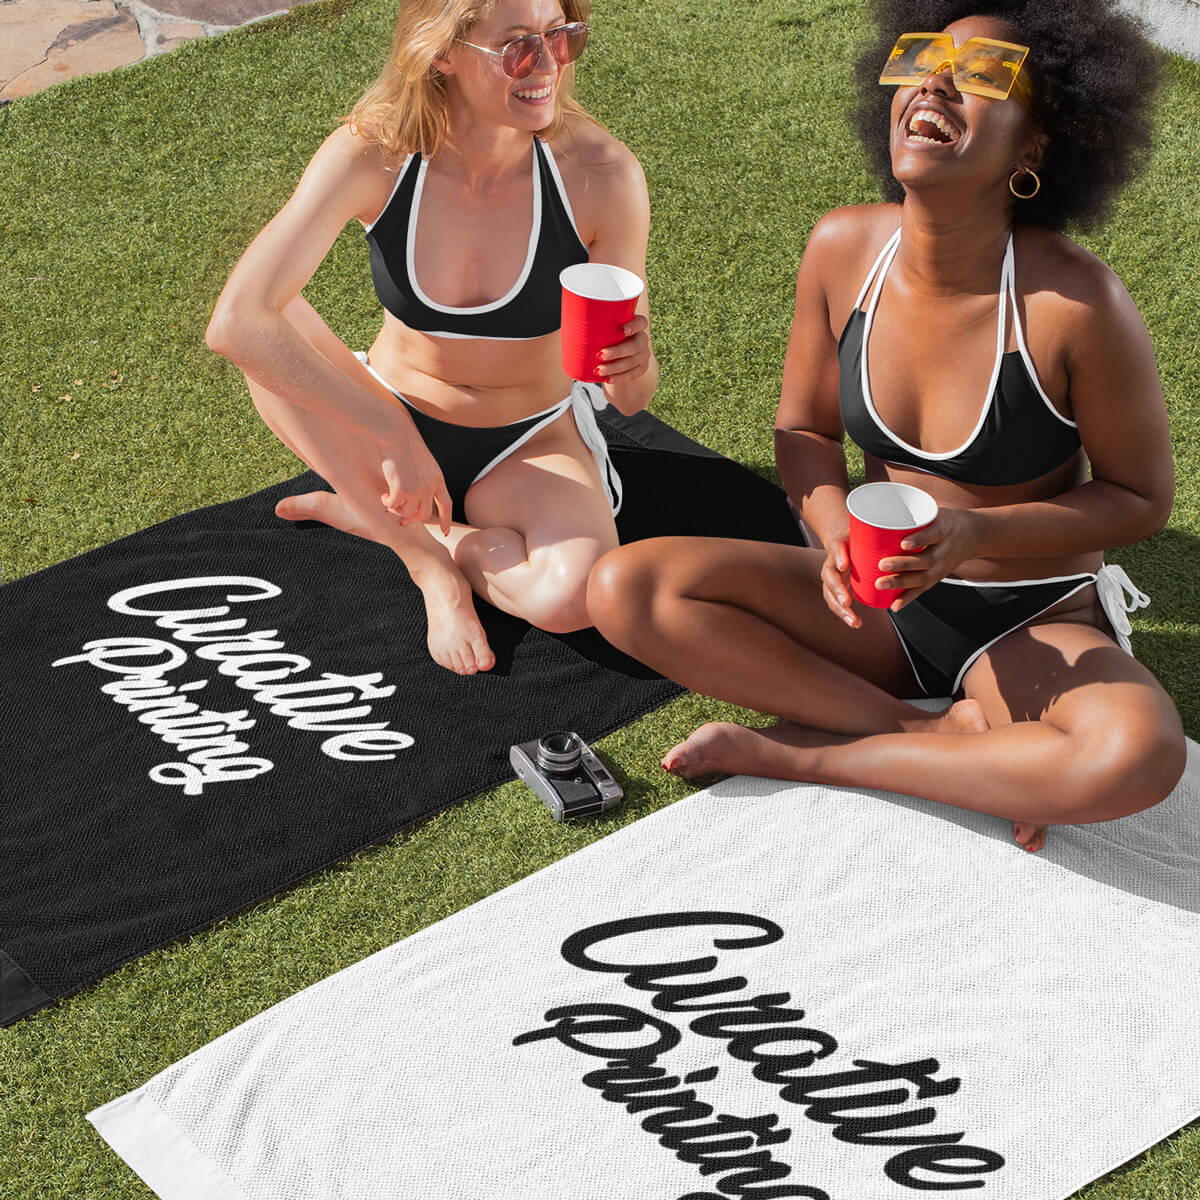 Happy women sunbathing on black and white colored beach towels promotional towels by curative printing